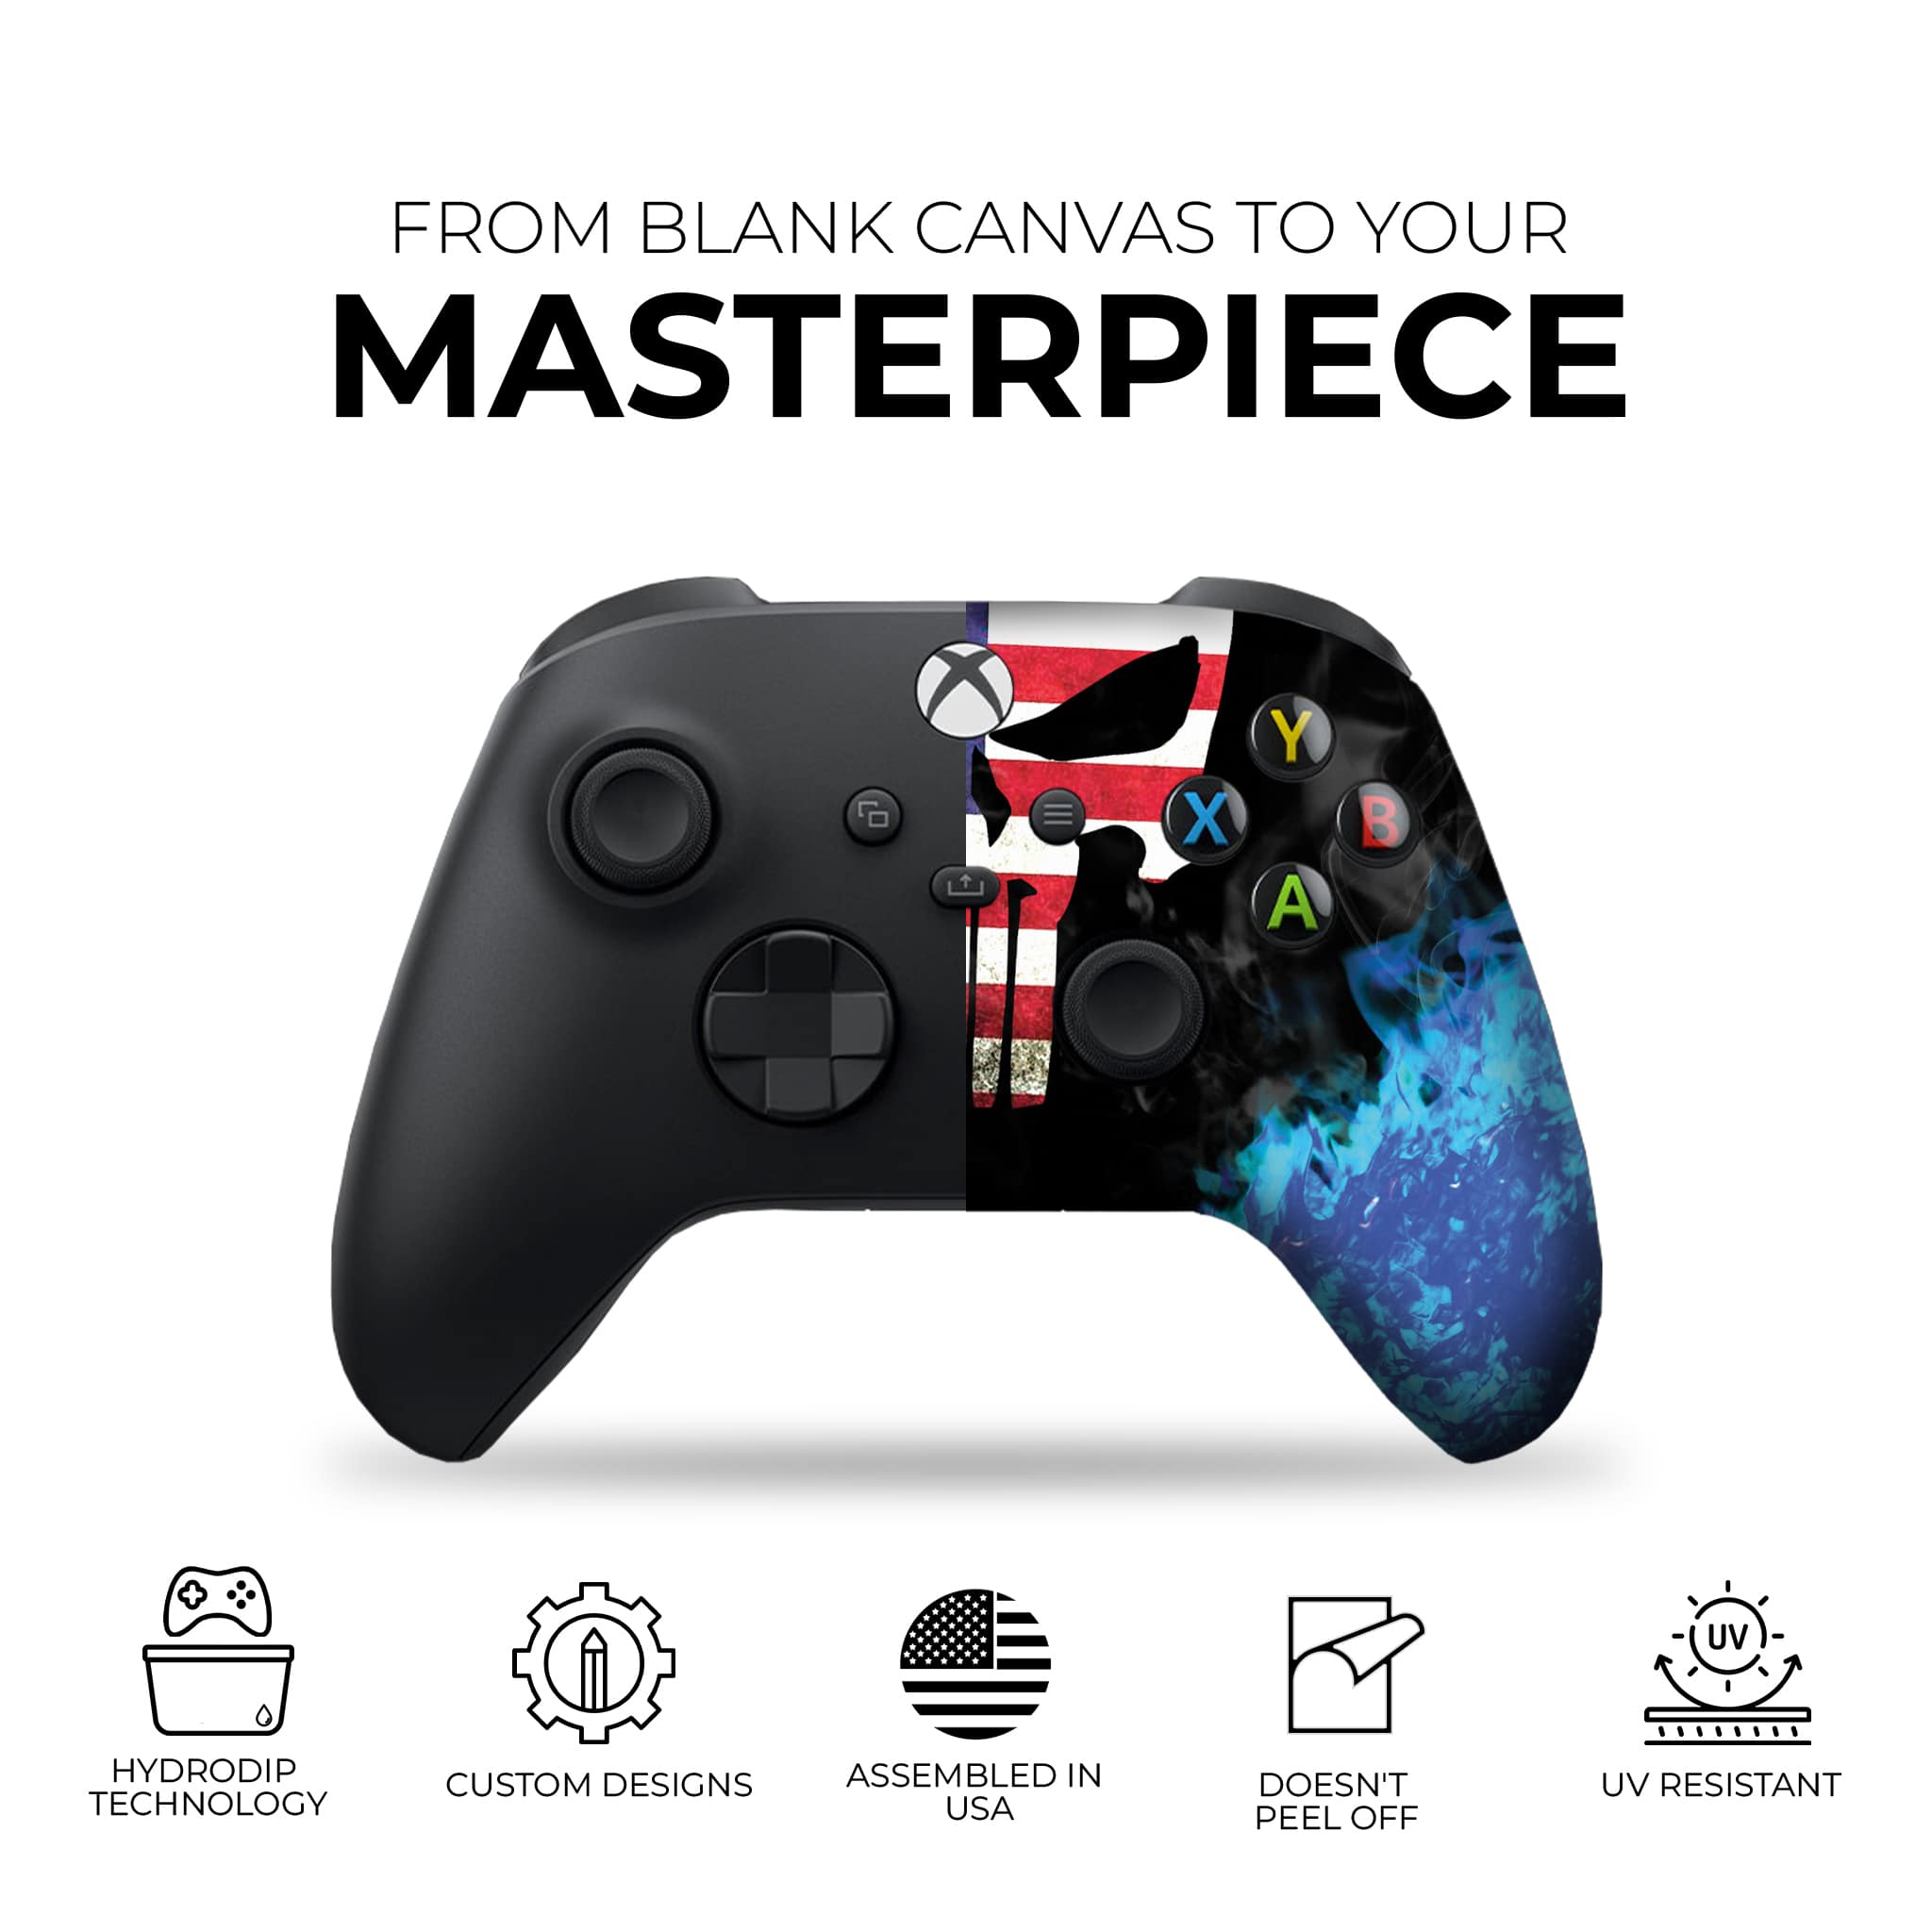 American Punisher Xbox Series X Controller: Xbox Series S Controller Modded - Dream Controller